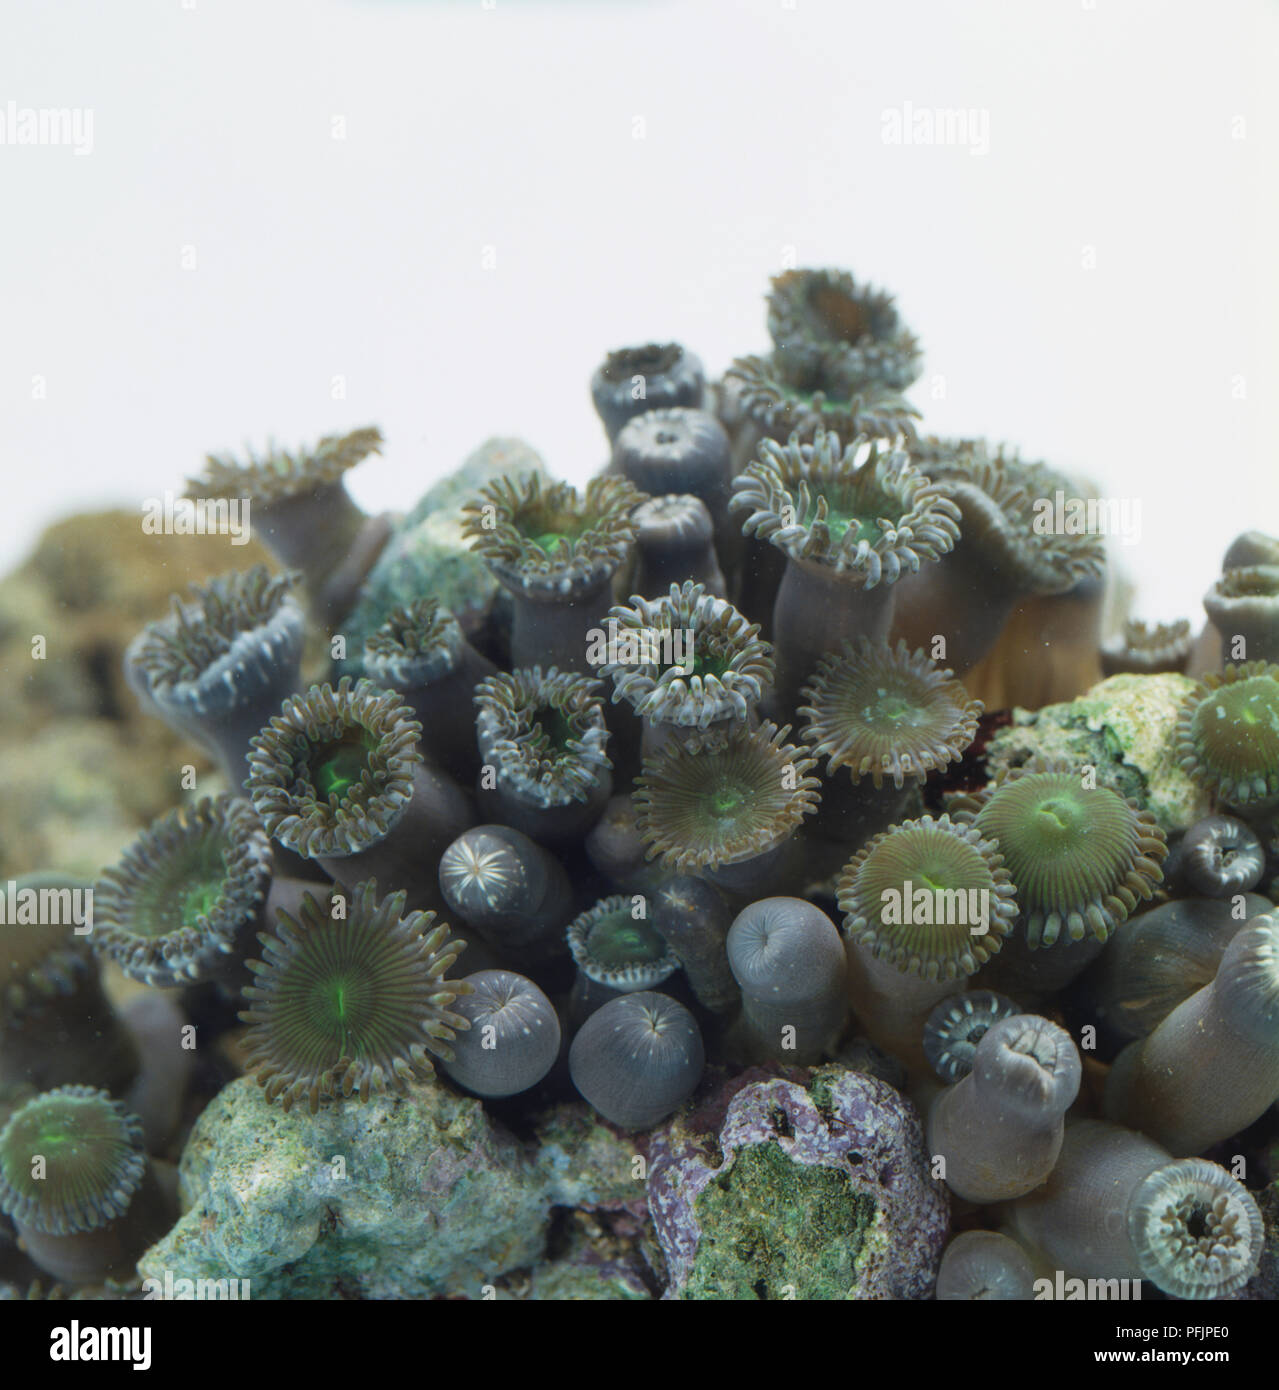 Purple and green Sea Anemones (Actinaria) on a reef, close up Stock Photo